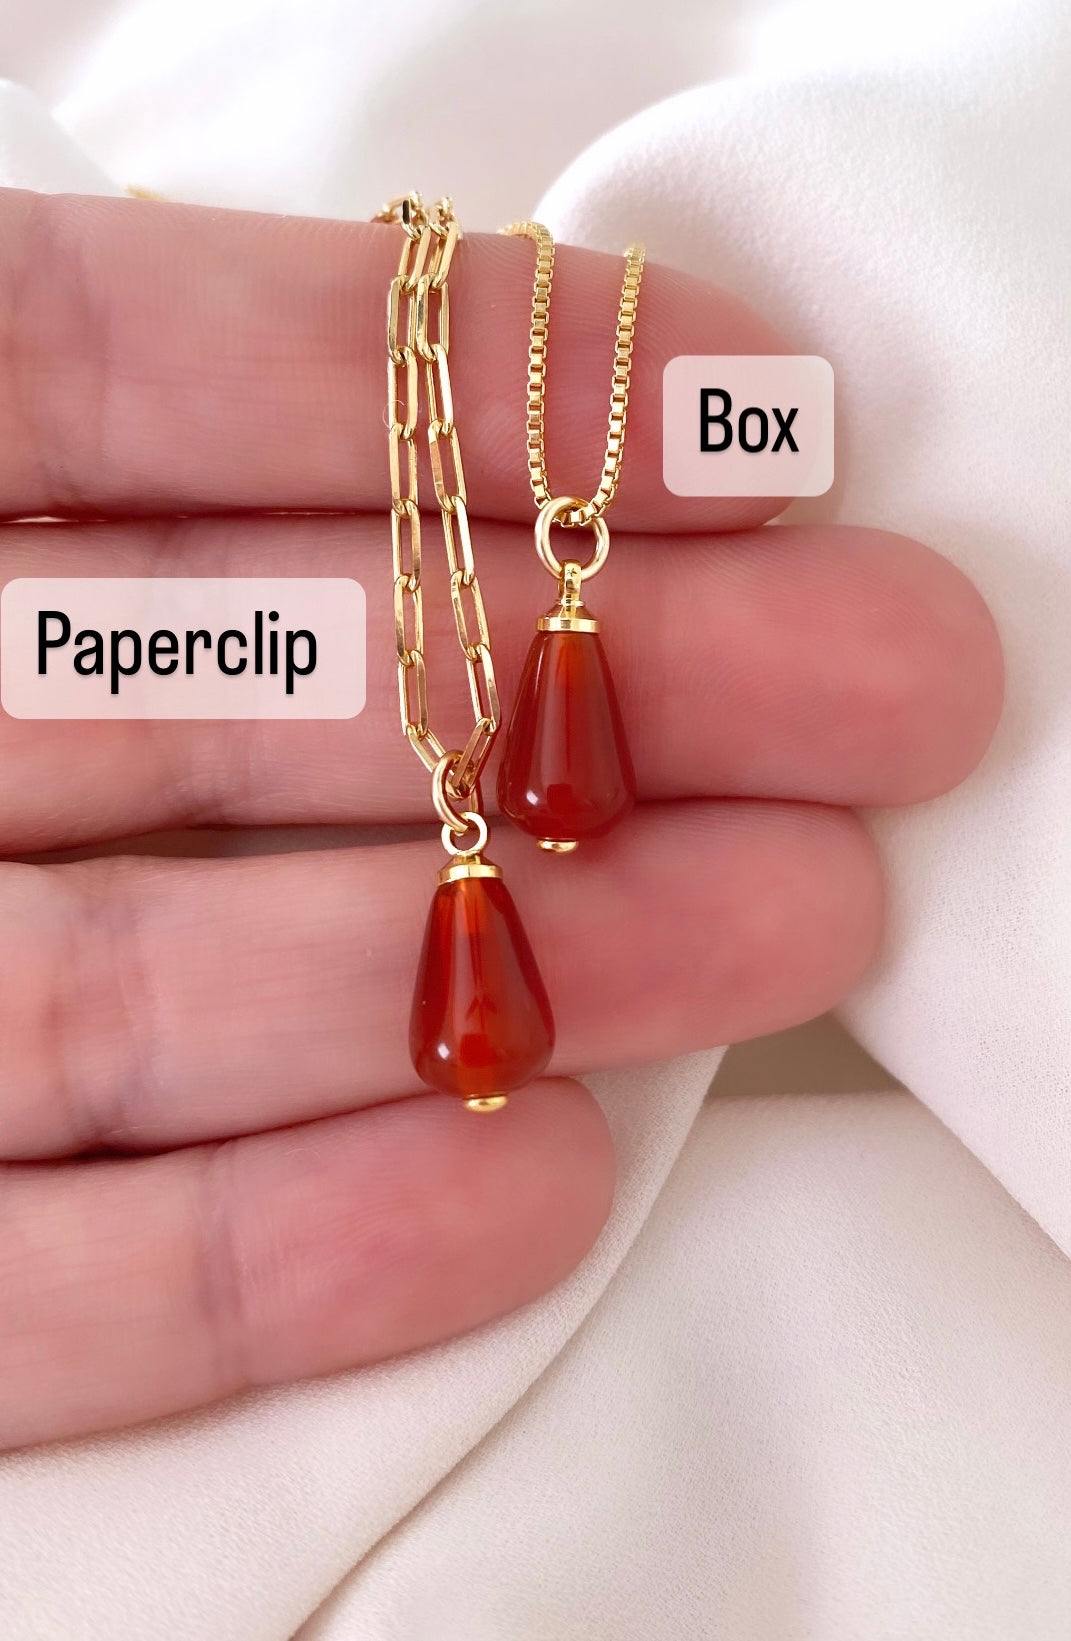 Carnelian Necklace Crystal Red Agate Pendant Jewelry Decoration Gemstone  Pendant Spiral Wire Wrapped Gift for Girls Boys - Walmart.com